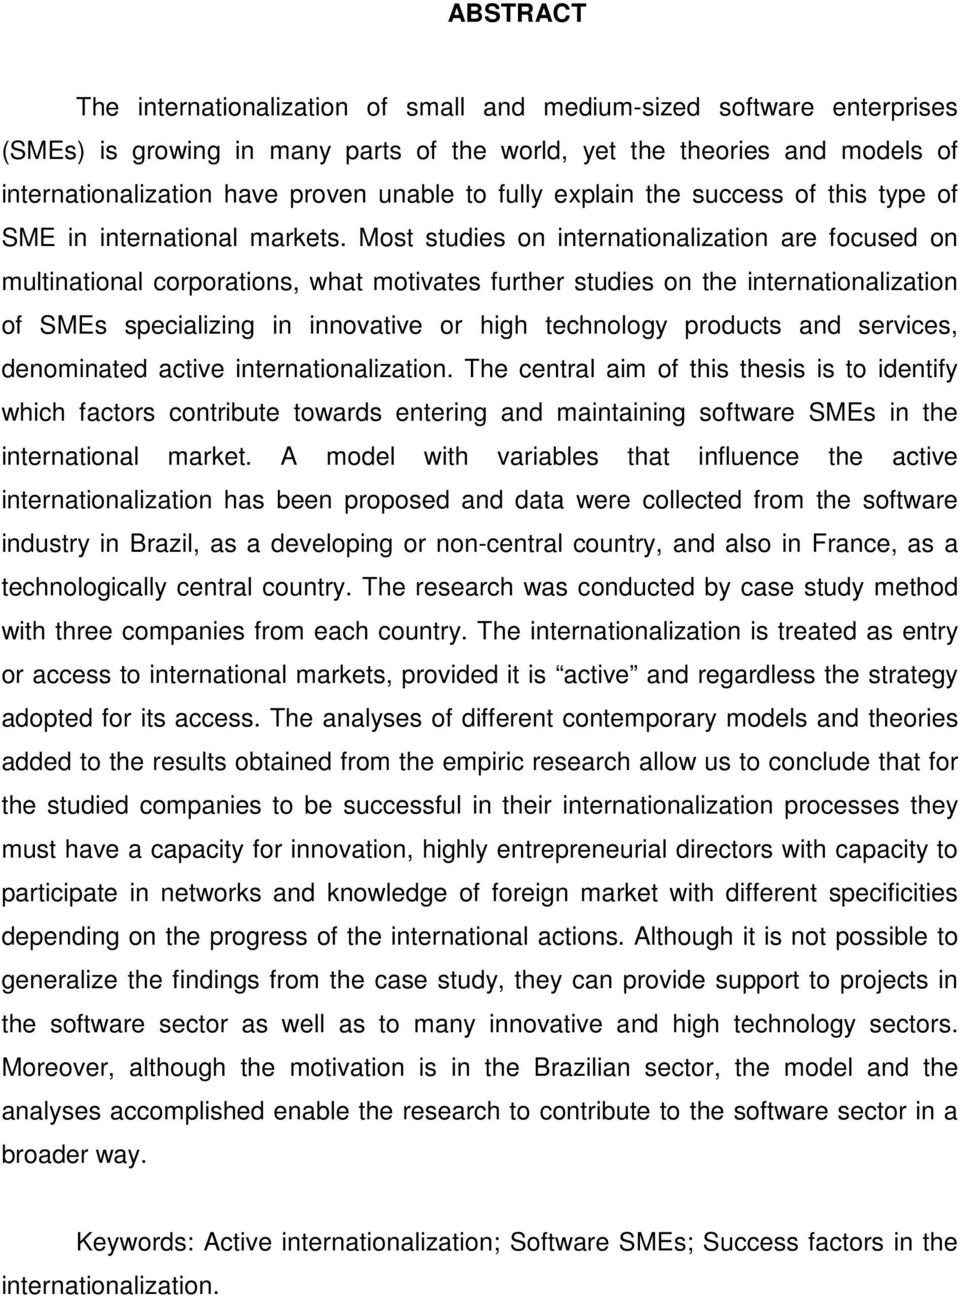 Most studies on internationalization are focused on multinational corporations, what motivates further studies on the internationalization of SMEs specializing in innovative or high technology